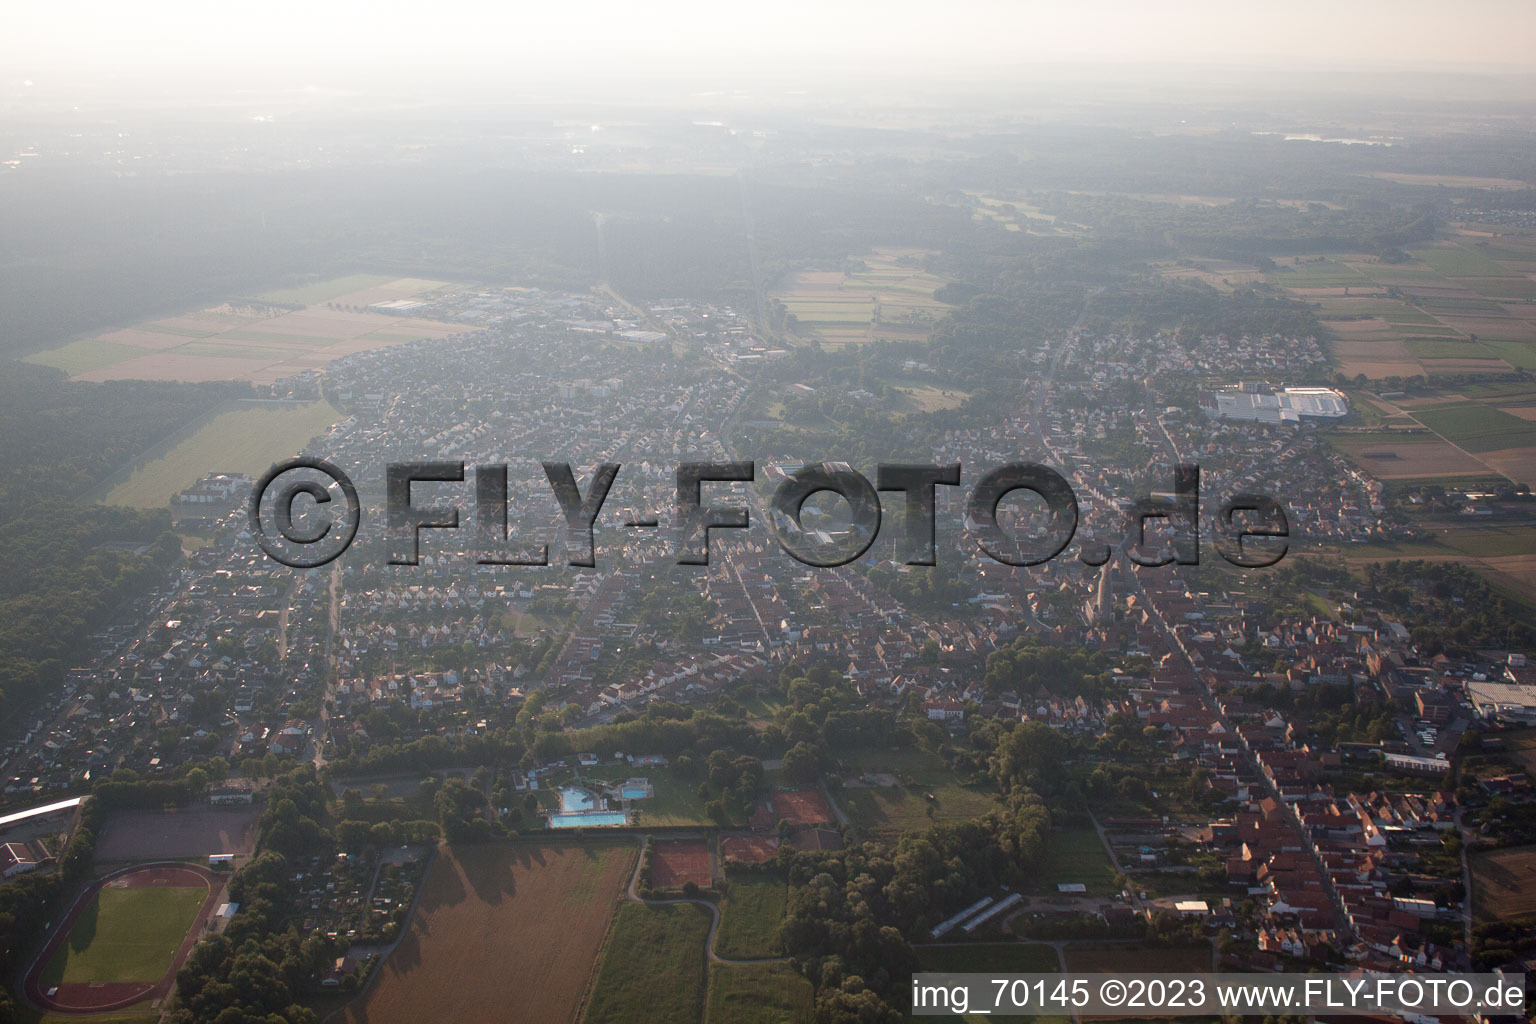 Bellheim in the state Rhineland-Palatinate, Germany from the drone perspective